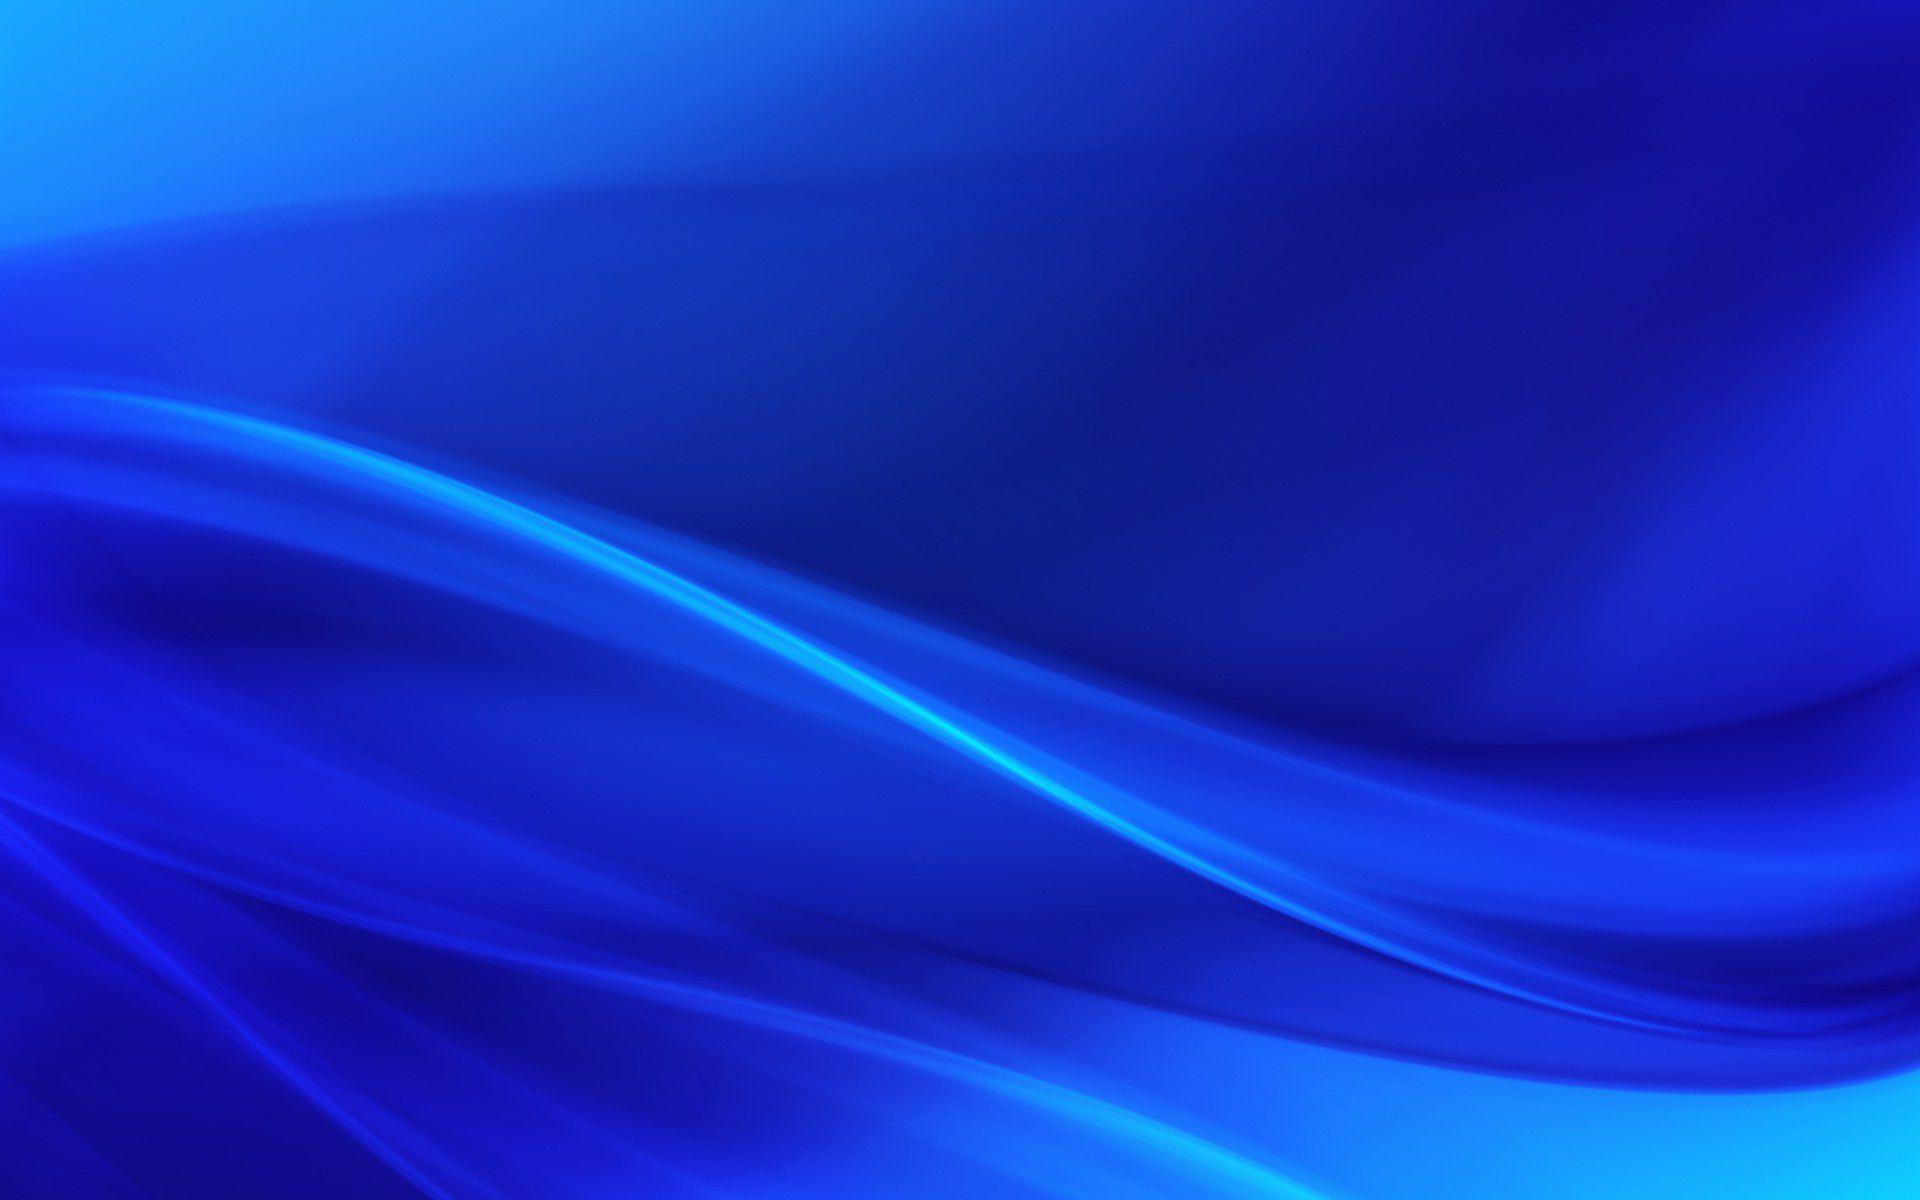 Blue Abstract Wave Wallpaper  Free Photoshop Brushes at Brusheezy